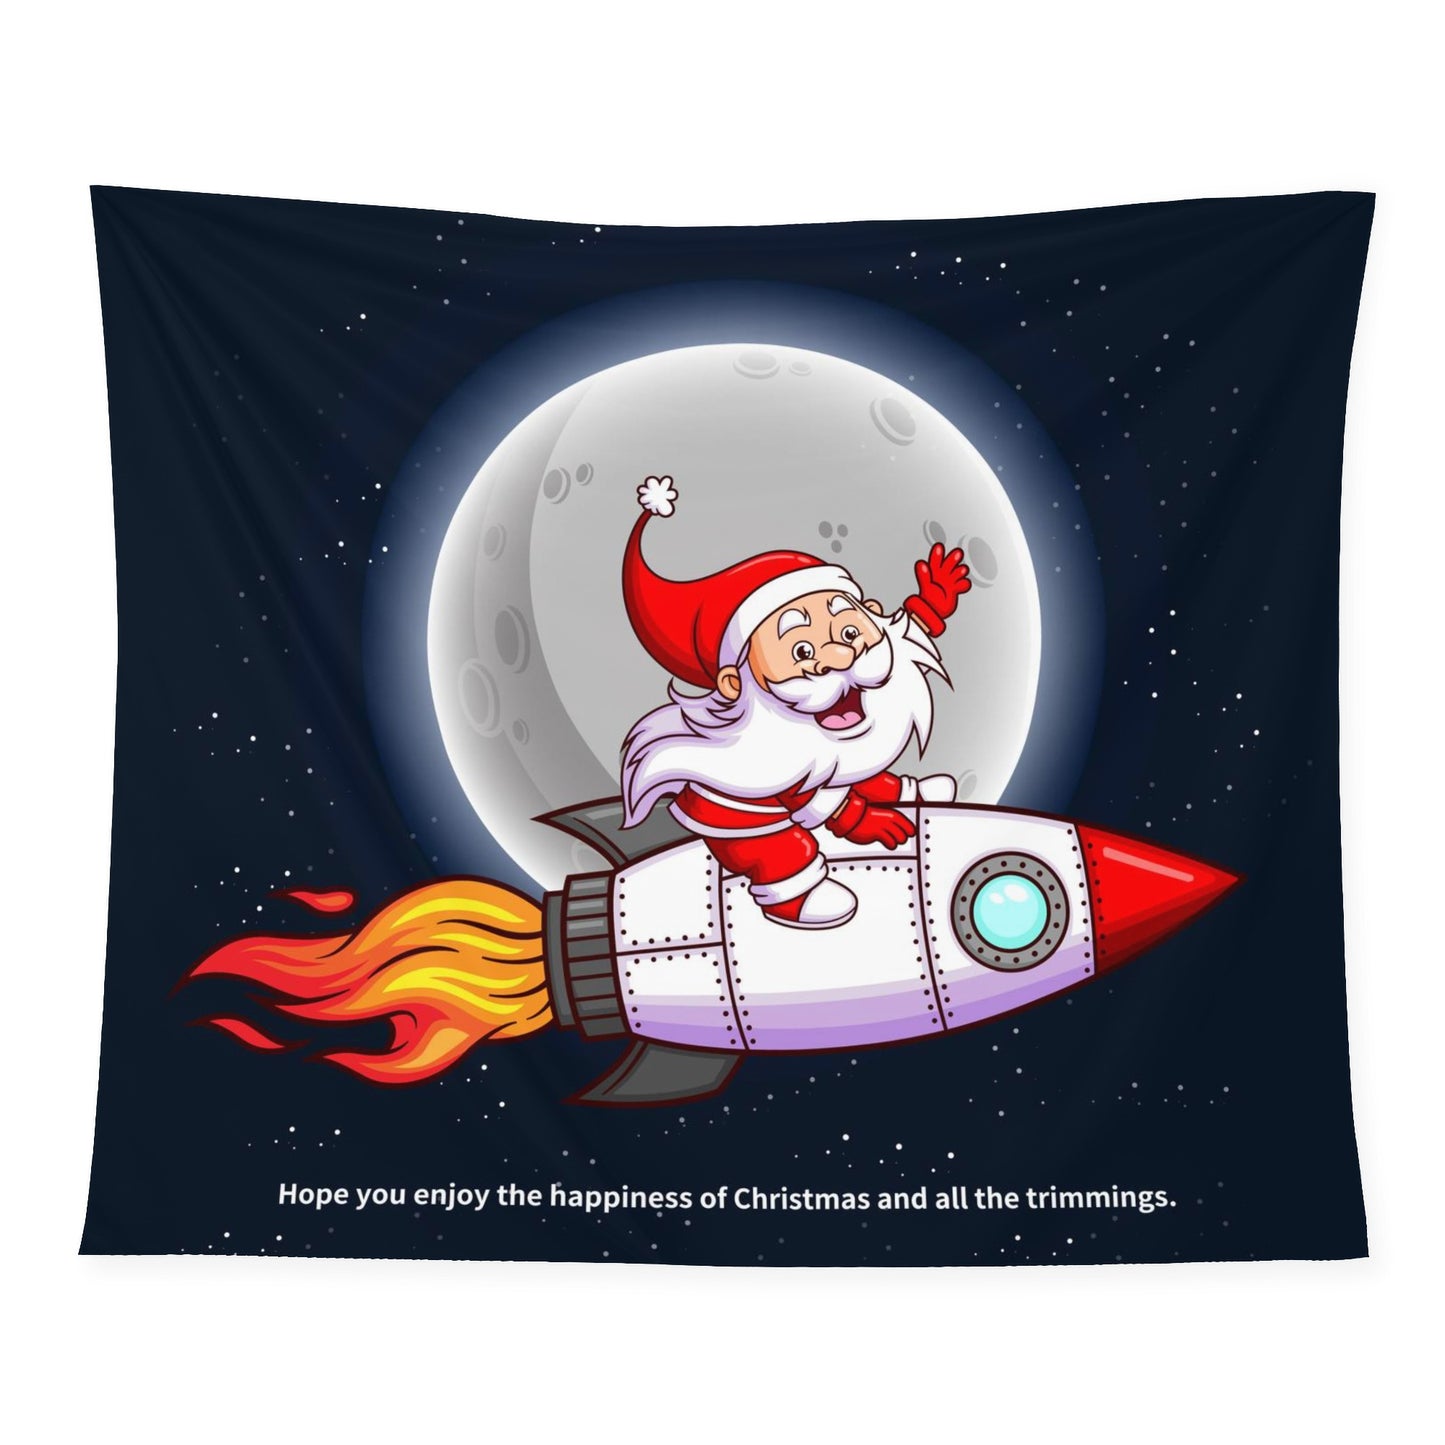 Rocket Christmas Wall Tapestry To Bring Beauty To Any Space